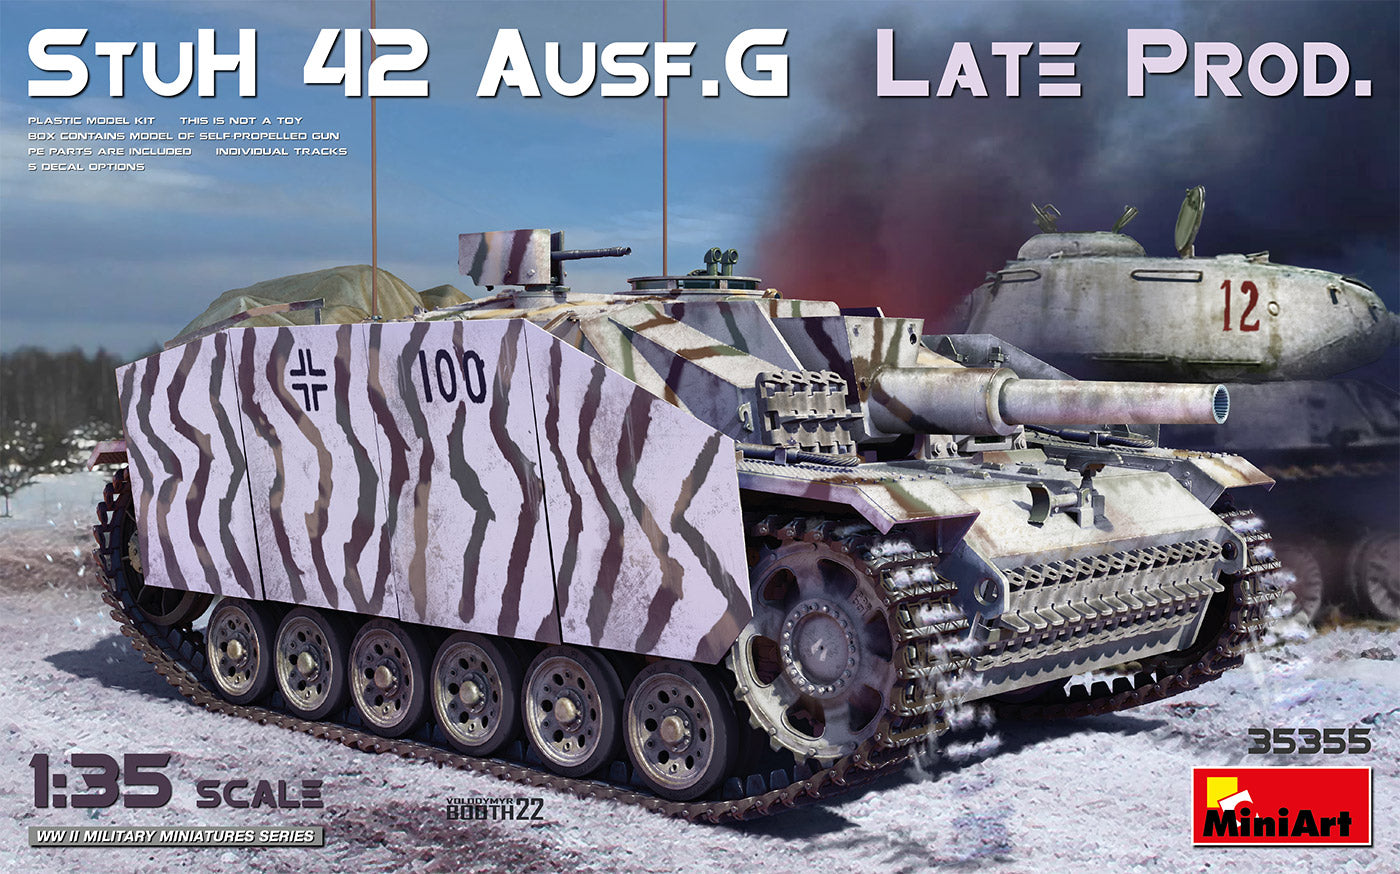 MiniArt 35355 1:35 StuH 42 Ausf. G Late Prod. – Model Kit Collector